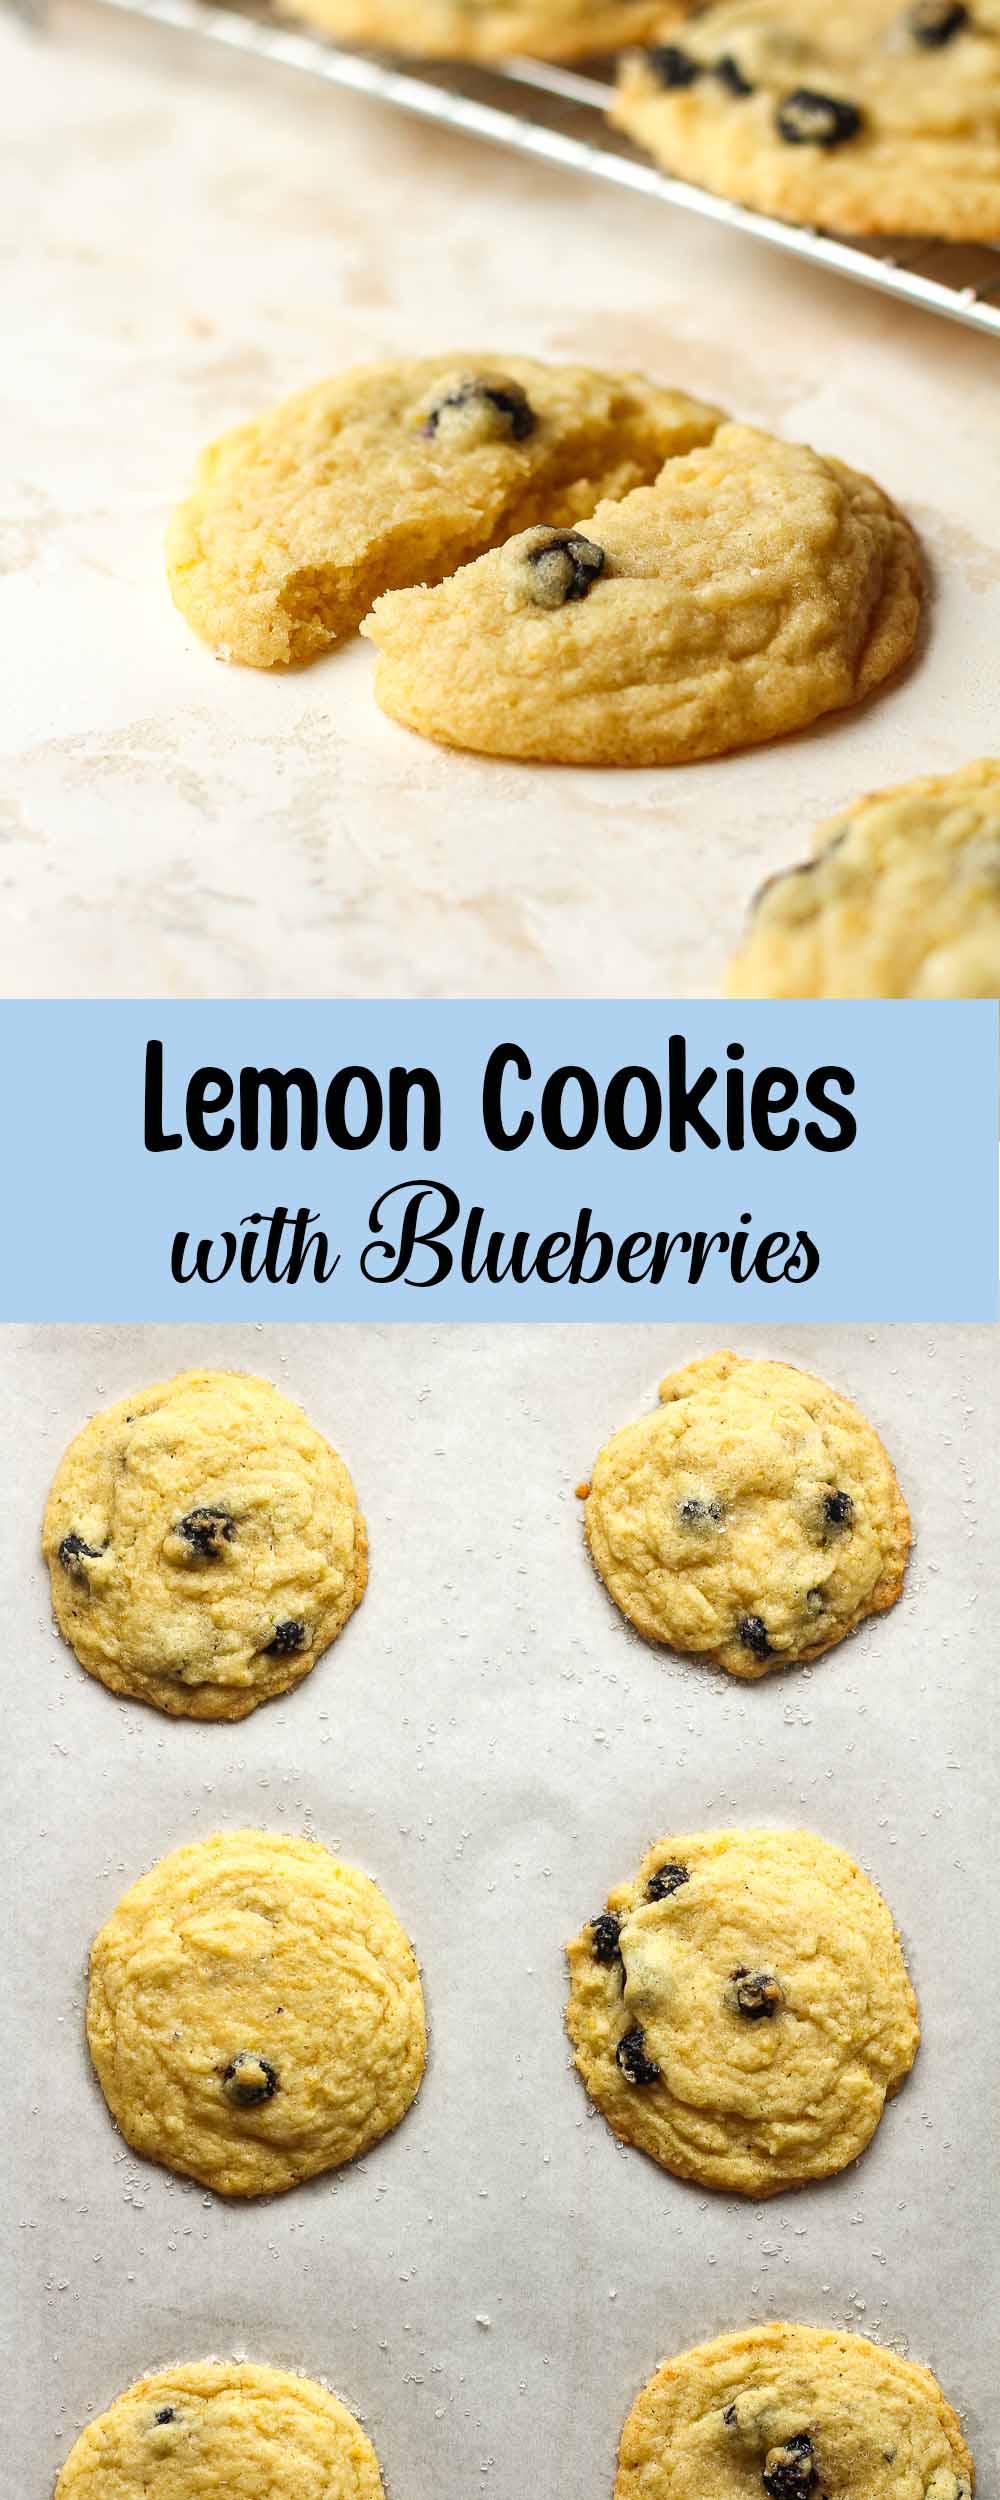 A collage of lemon cookies with blueberries.